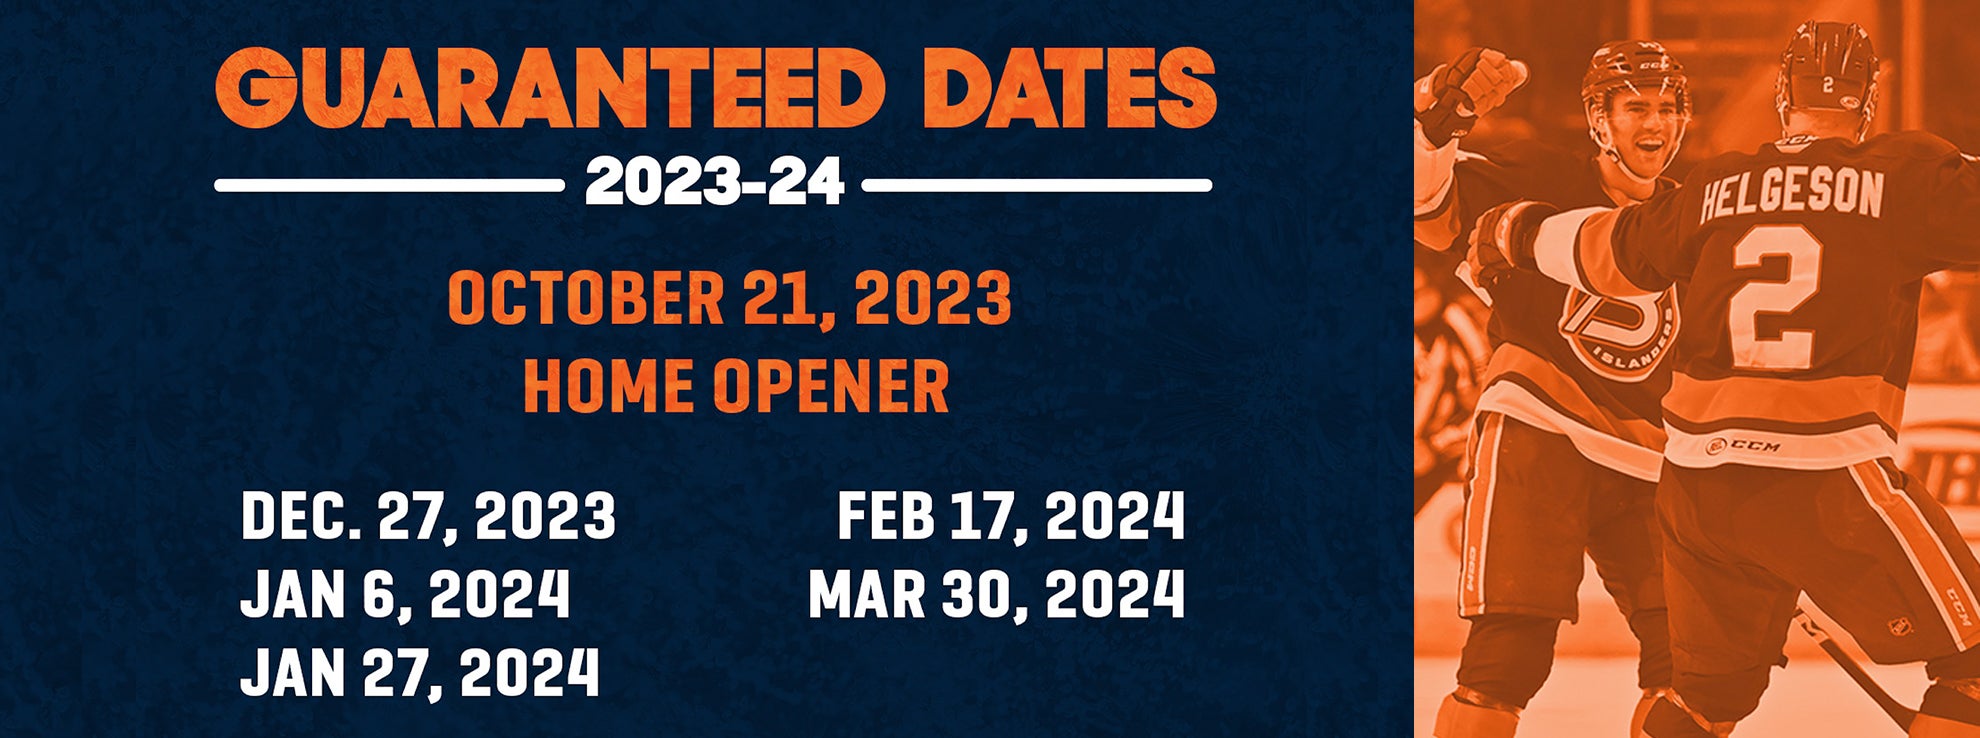 Six Guaranteed Home Dates for 2023-24